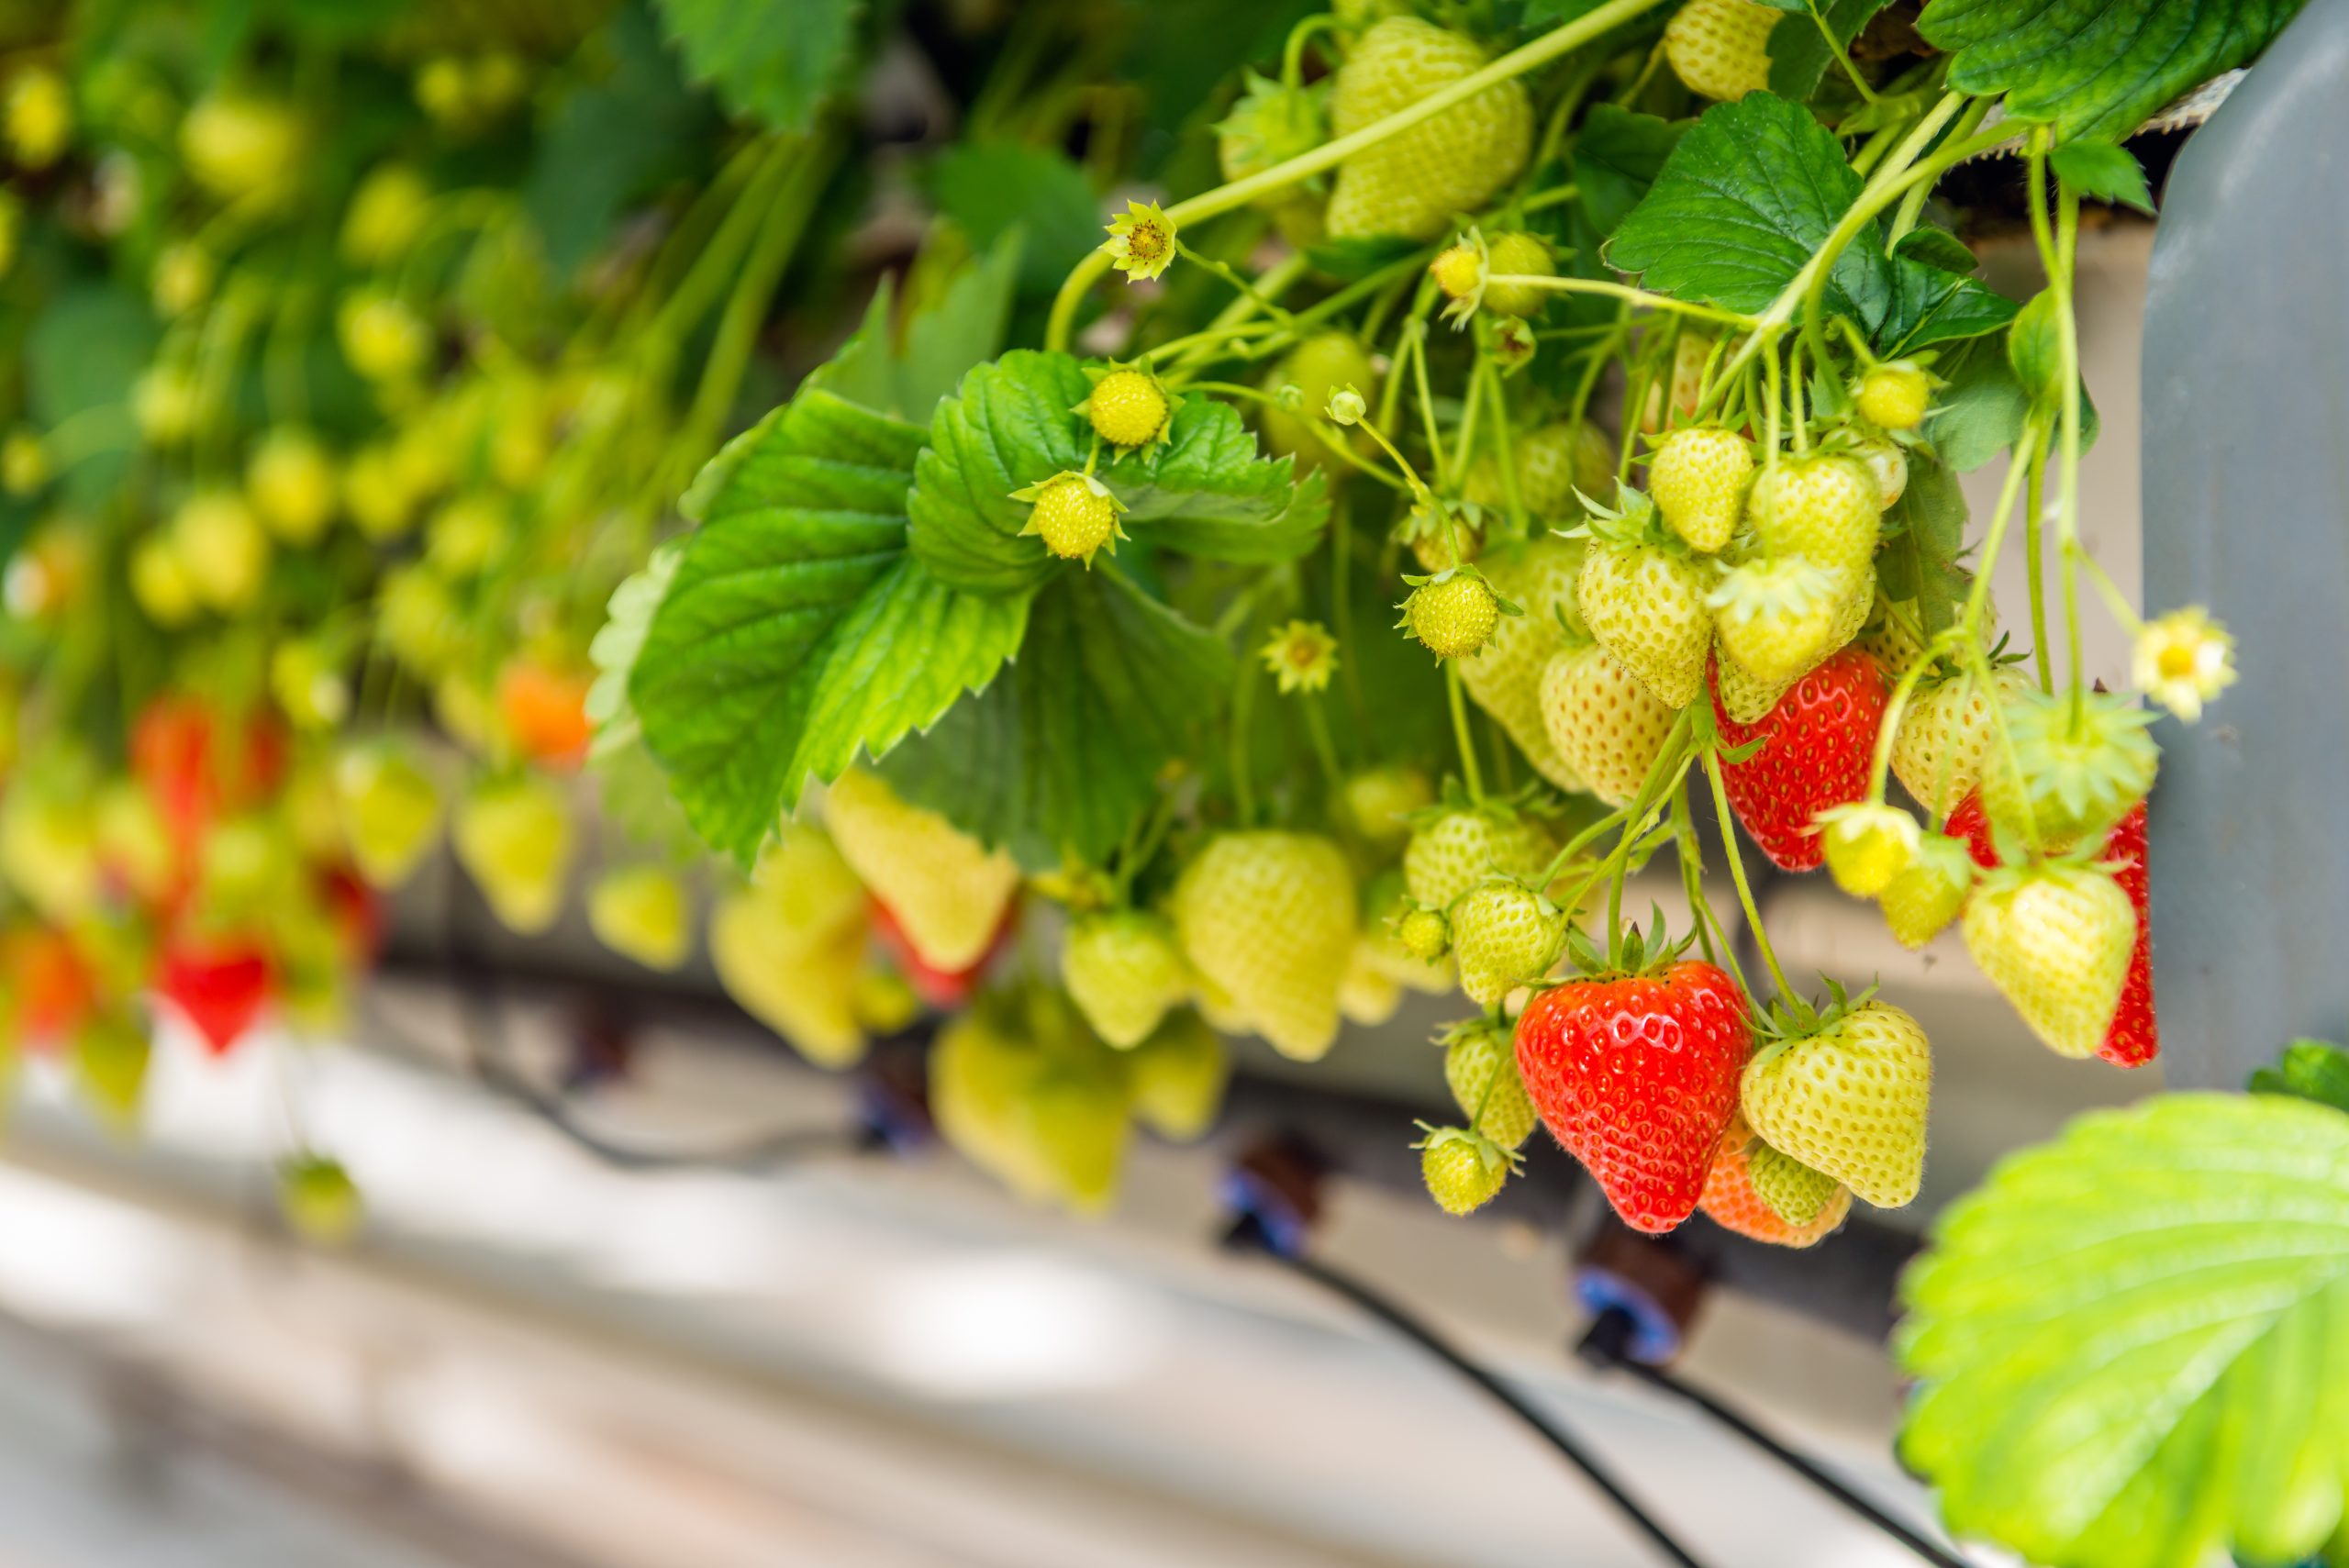 Many ripening strawberries grown without soil at an ergonomic picking height in a modern specialized Dutch greenhouse.